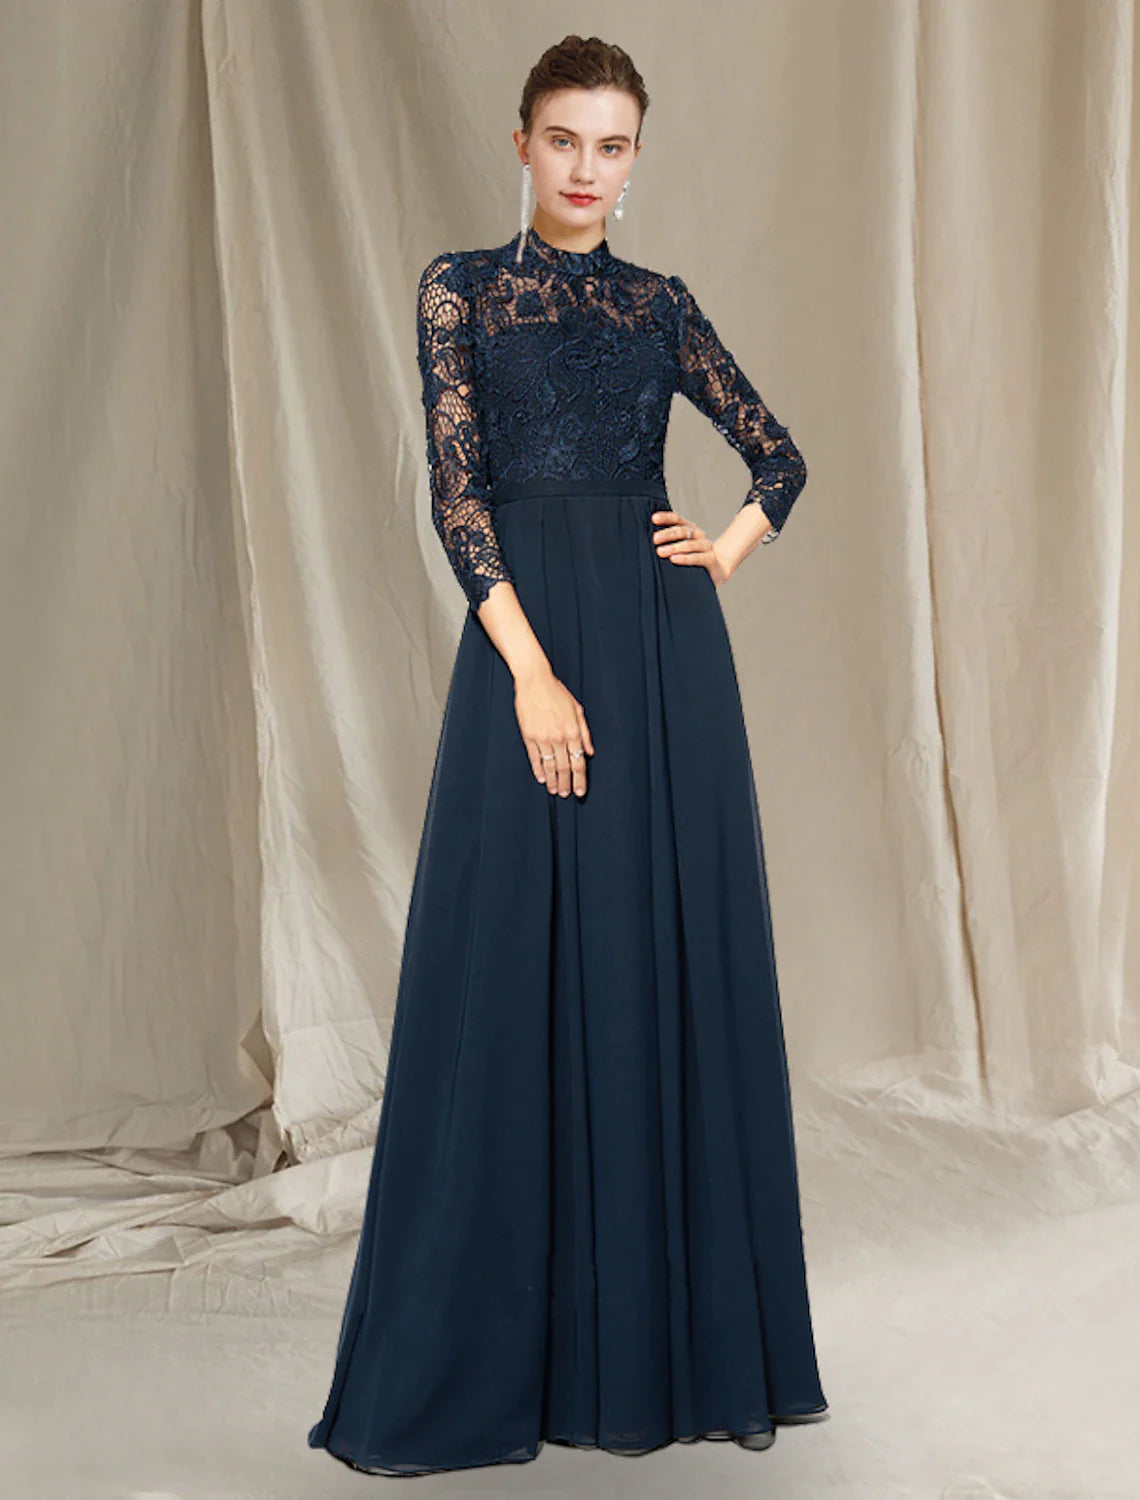 A-Line Mother of the Bride Dress Elegant High Neck Floor Length Chiffon Lace Short Sleeve with Pleats